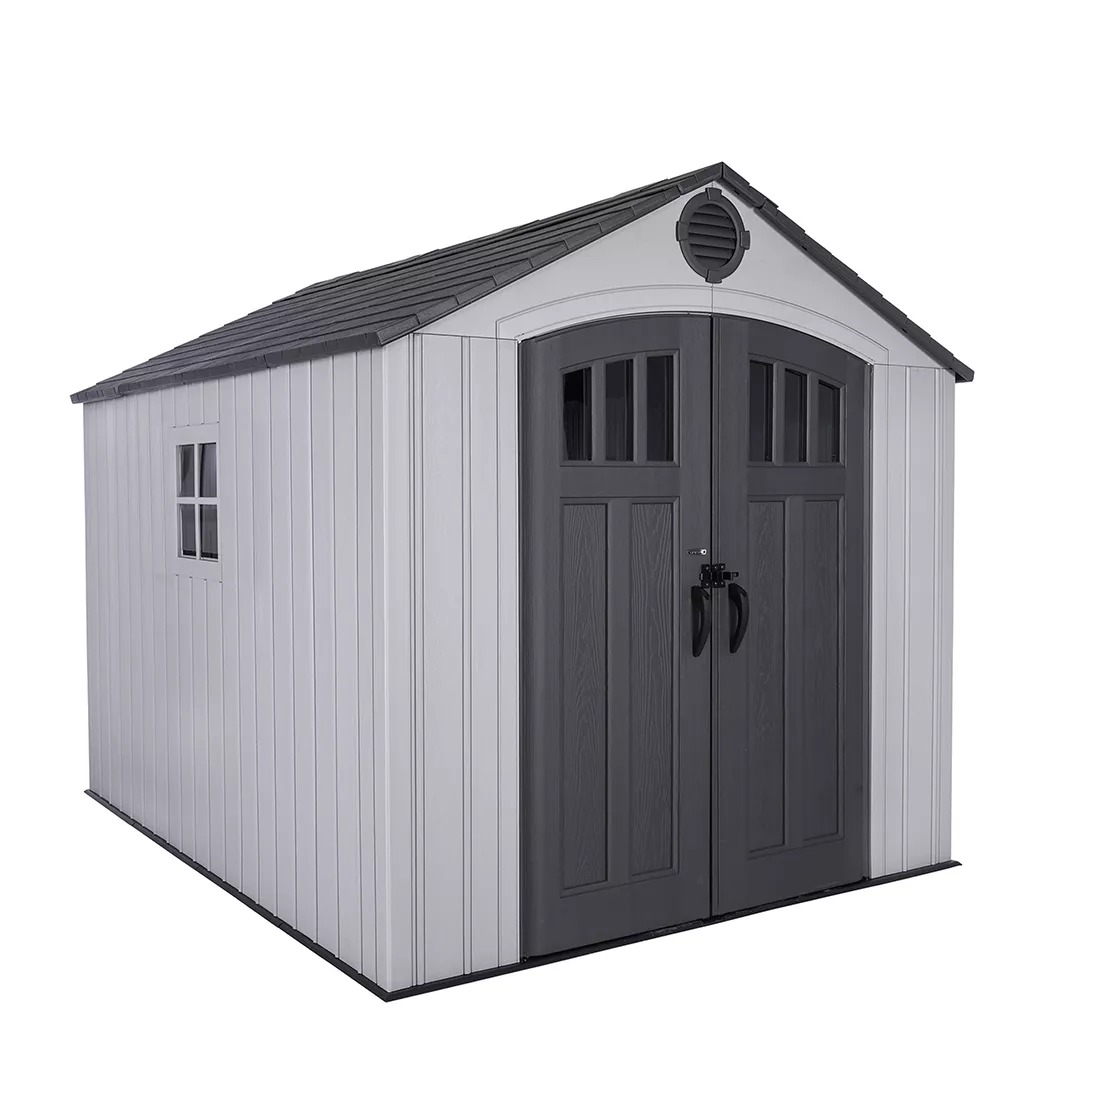 Lifetime 8′ x 10′ Outdoor Storage Shed1